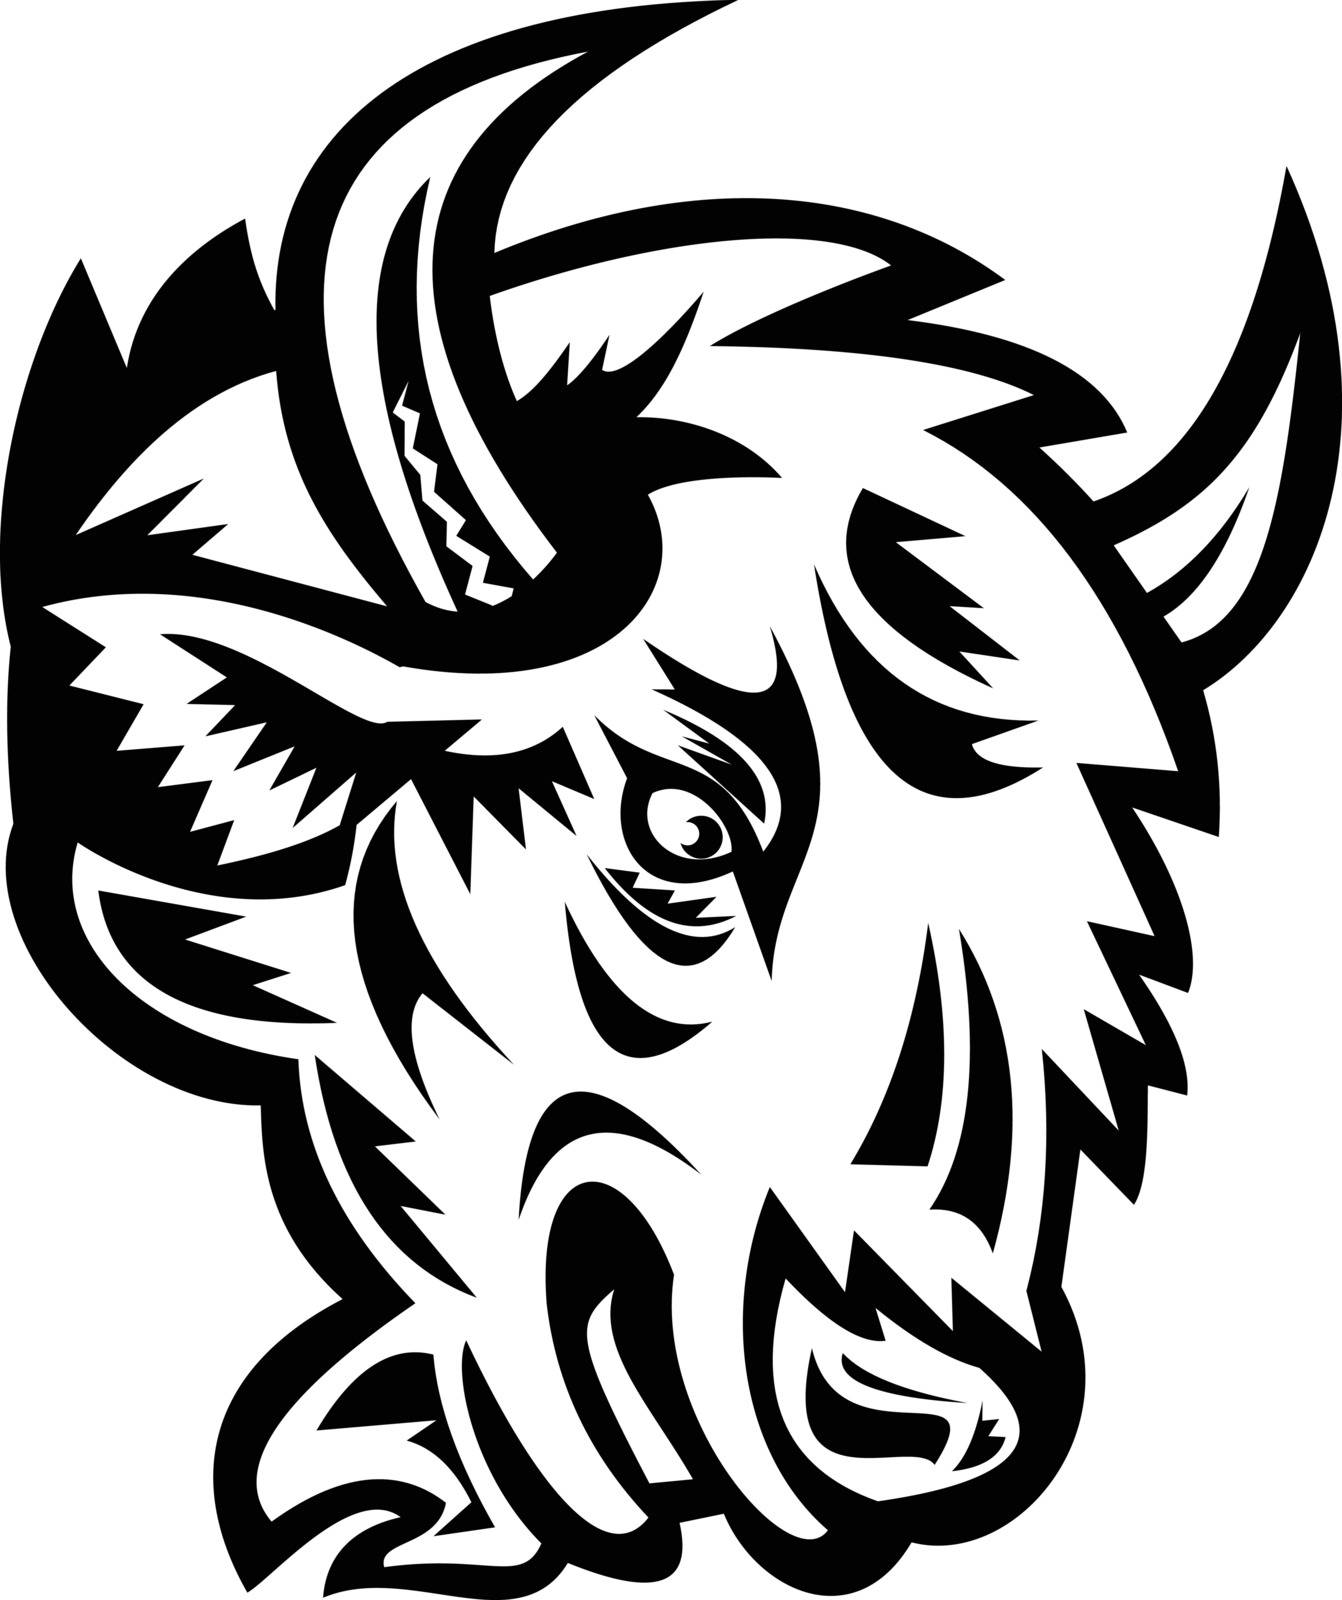 Mascot illustration of head of an angry North American bison or American buffalo viewed from side on isolated background in retro black and white style.